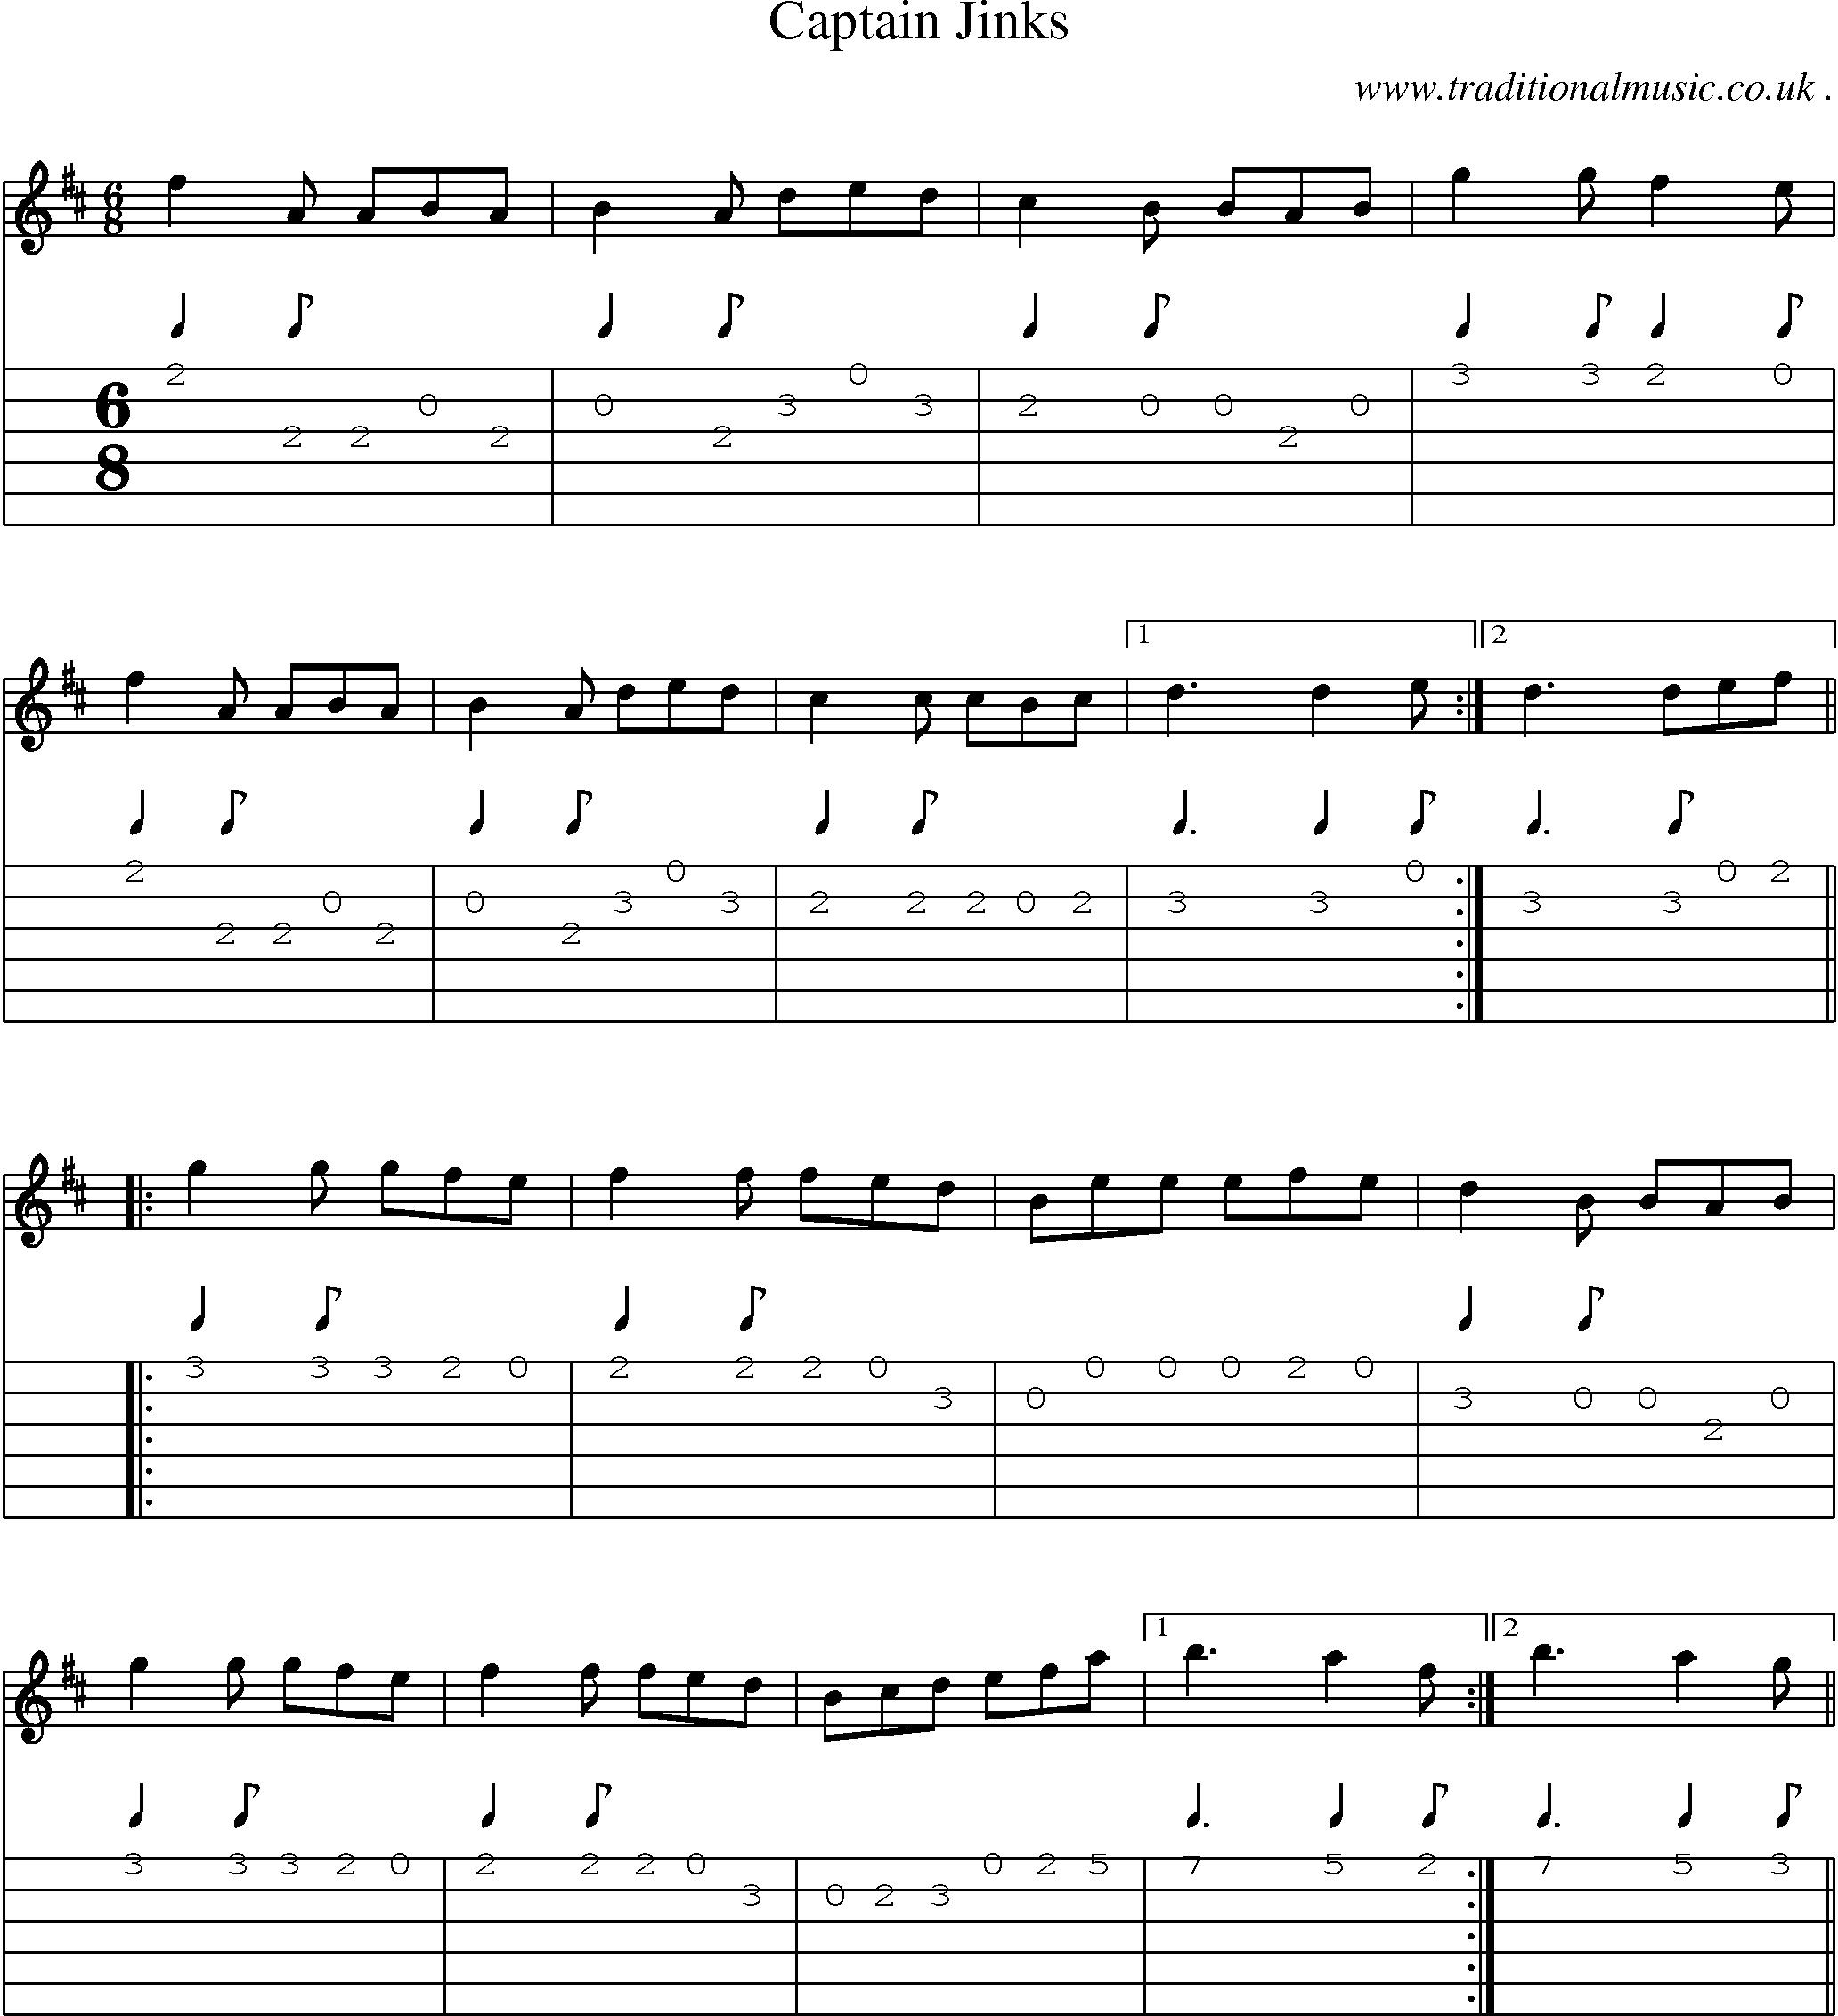 Sheet-Music and Guitar Tabs for Captain Jinks